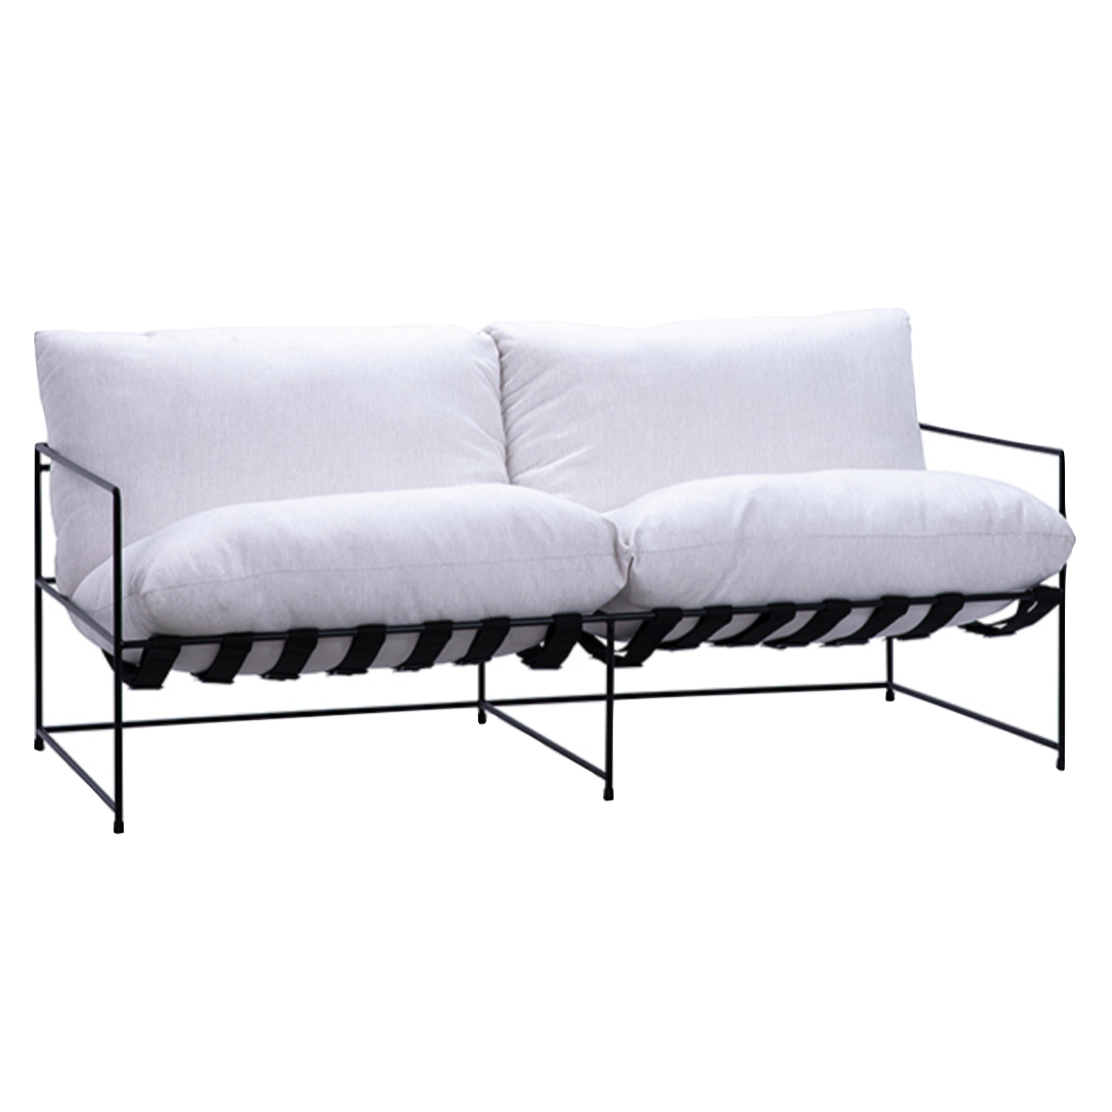 Similar to our Amethyst Favorite Alvar Chair, this Maurice 2 Seater Sofa brings comfort and style to any room. This features an elegant, slender frame with the cozy look and feel of plush, overstuffed cushions.  100% Polyester, Metal Frame Off White Color Upholstery with Matte Black Metal Frame Performance Fabric Size: 71"l x 36"d x 33"h